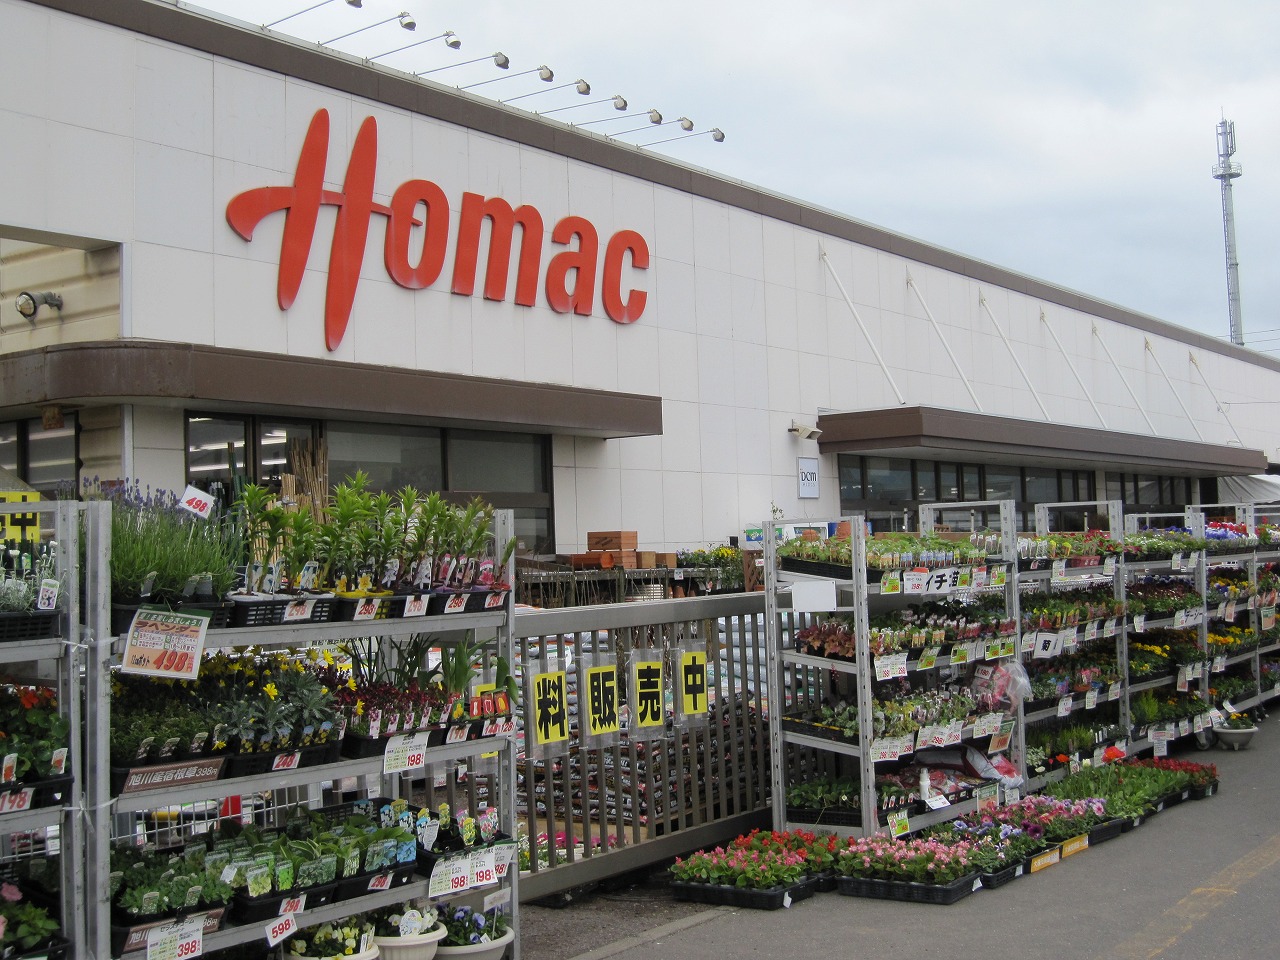 Home center. Homac Corporation Itoi to the store (hardware store) 2599m